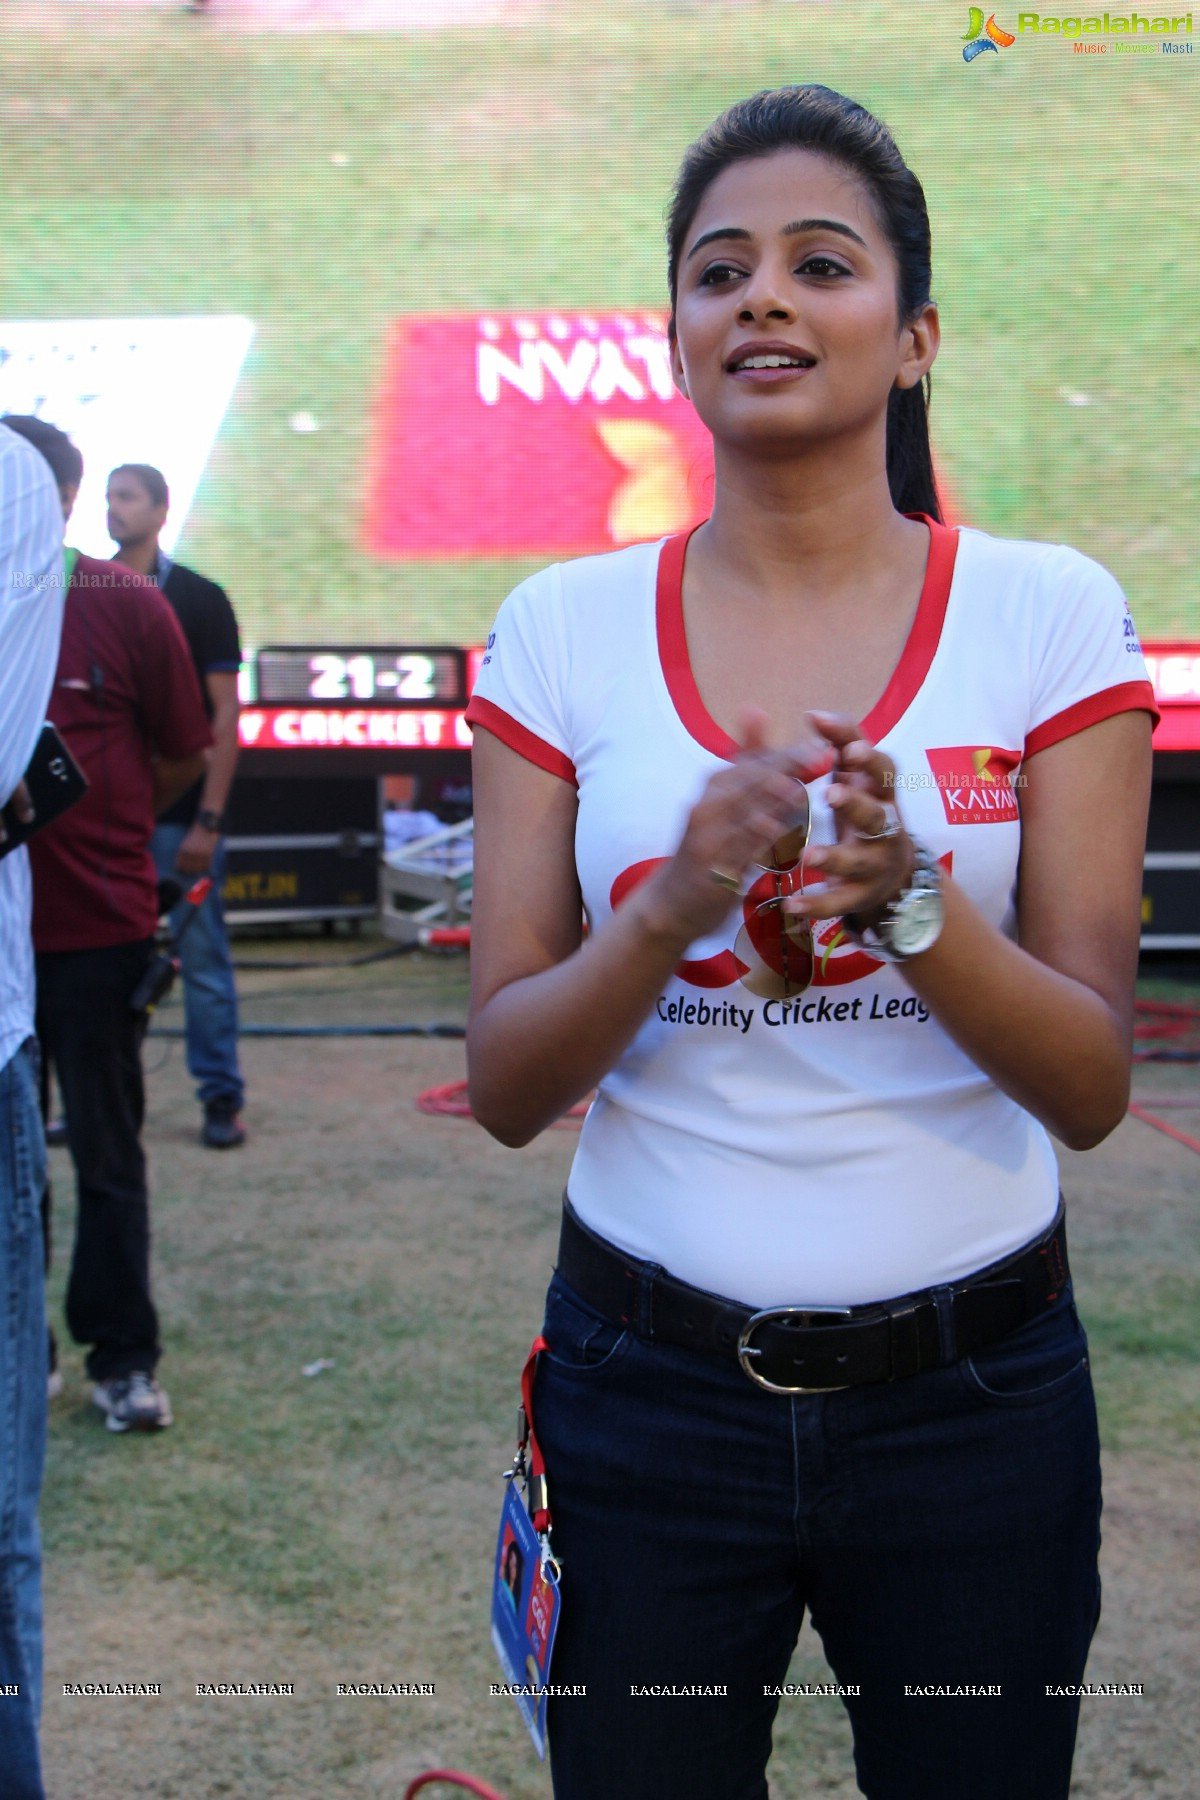 Priyamani at Celebrity Cricket League 2013 (CCL 3) - HD Gallery, Images